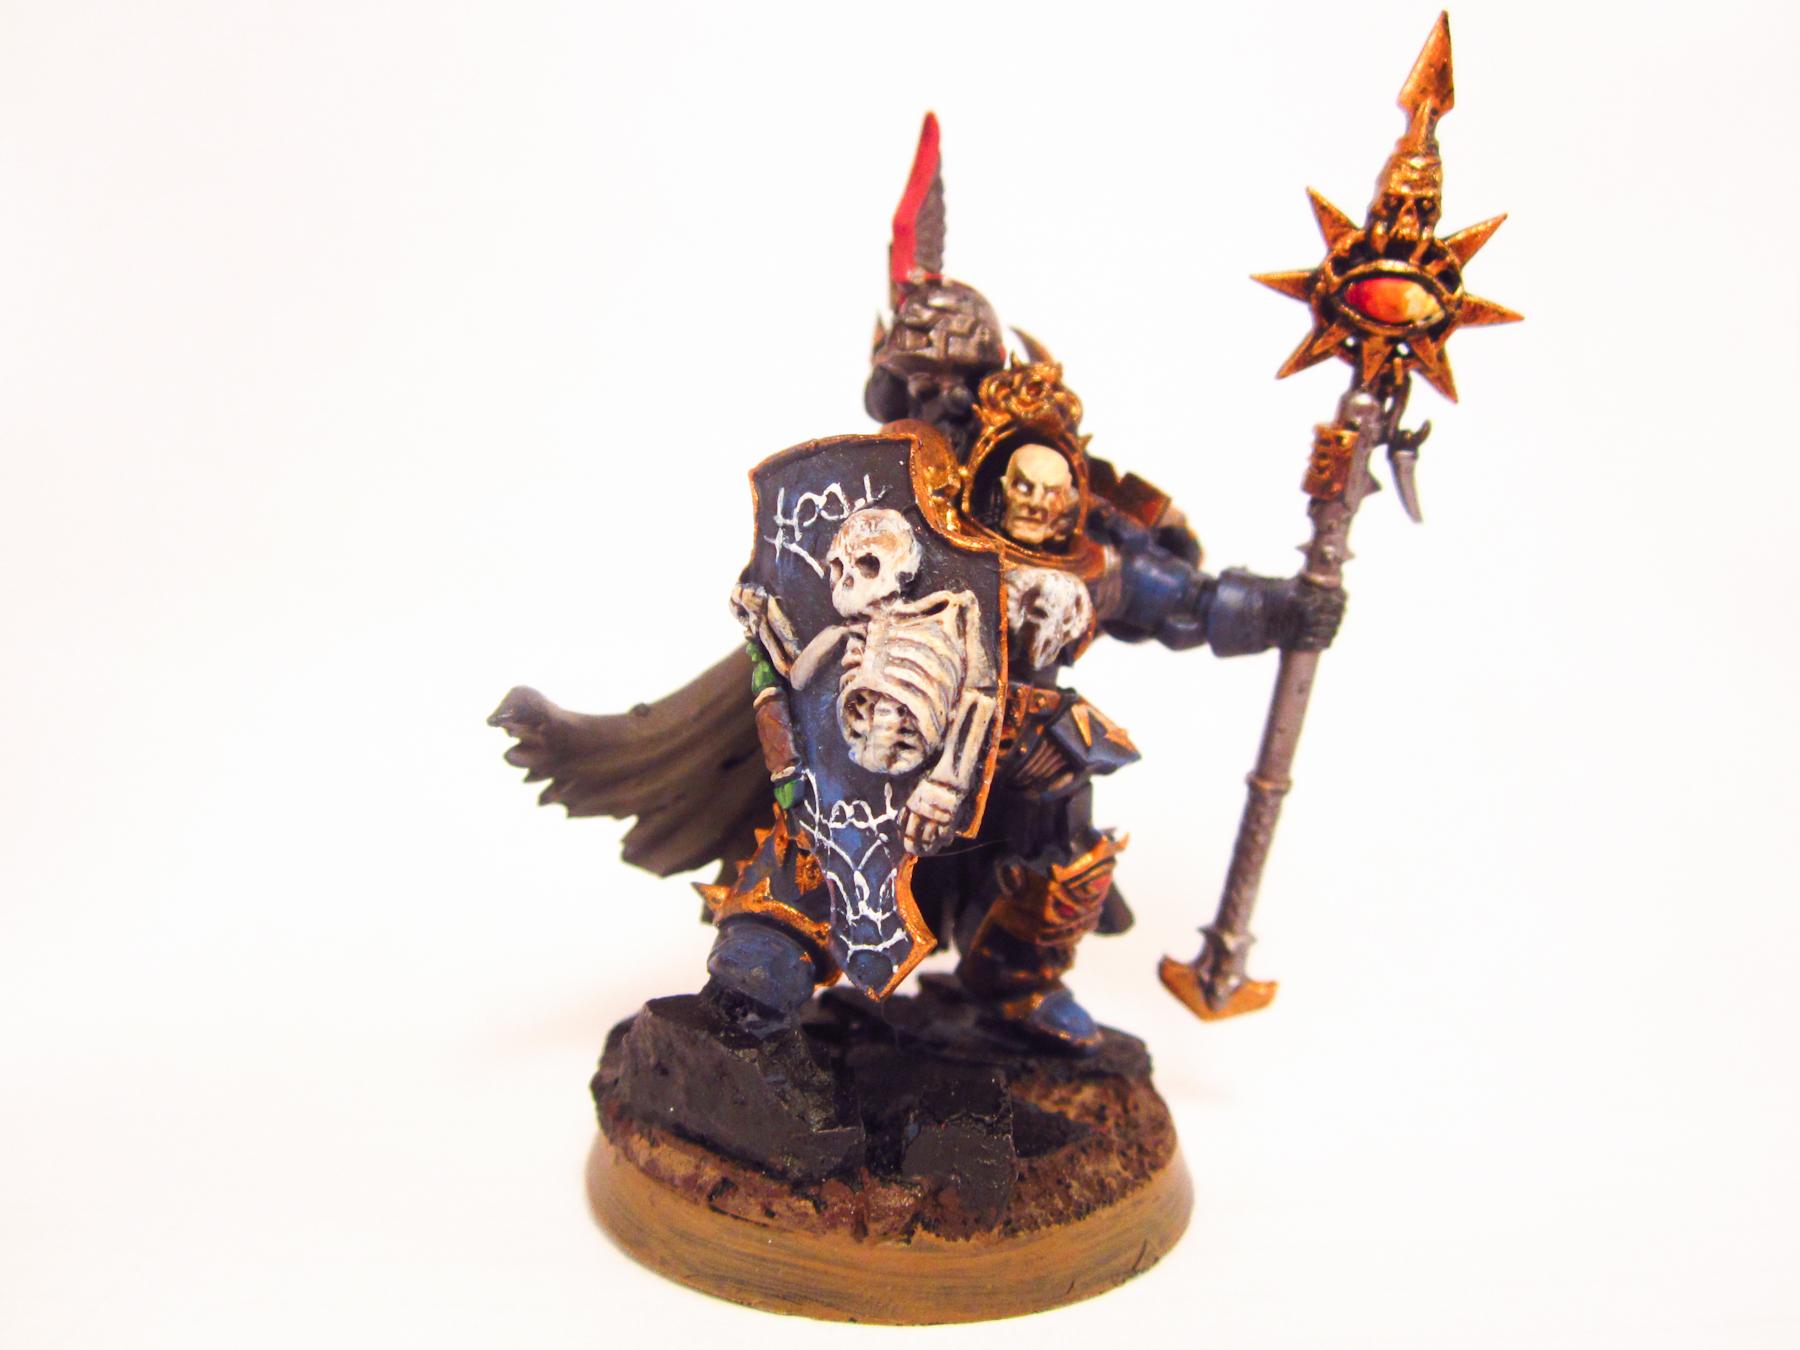 Chaos Space Marines, Sorcerer, Thousand Sons, Warhammer 40,000